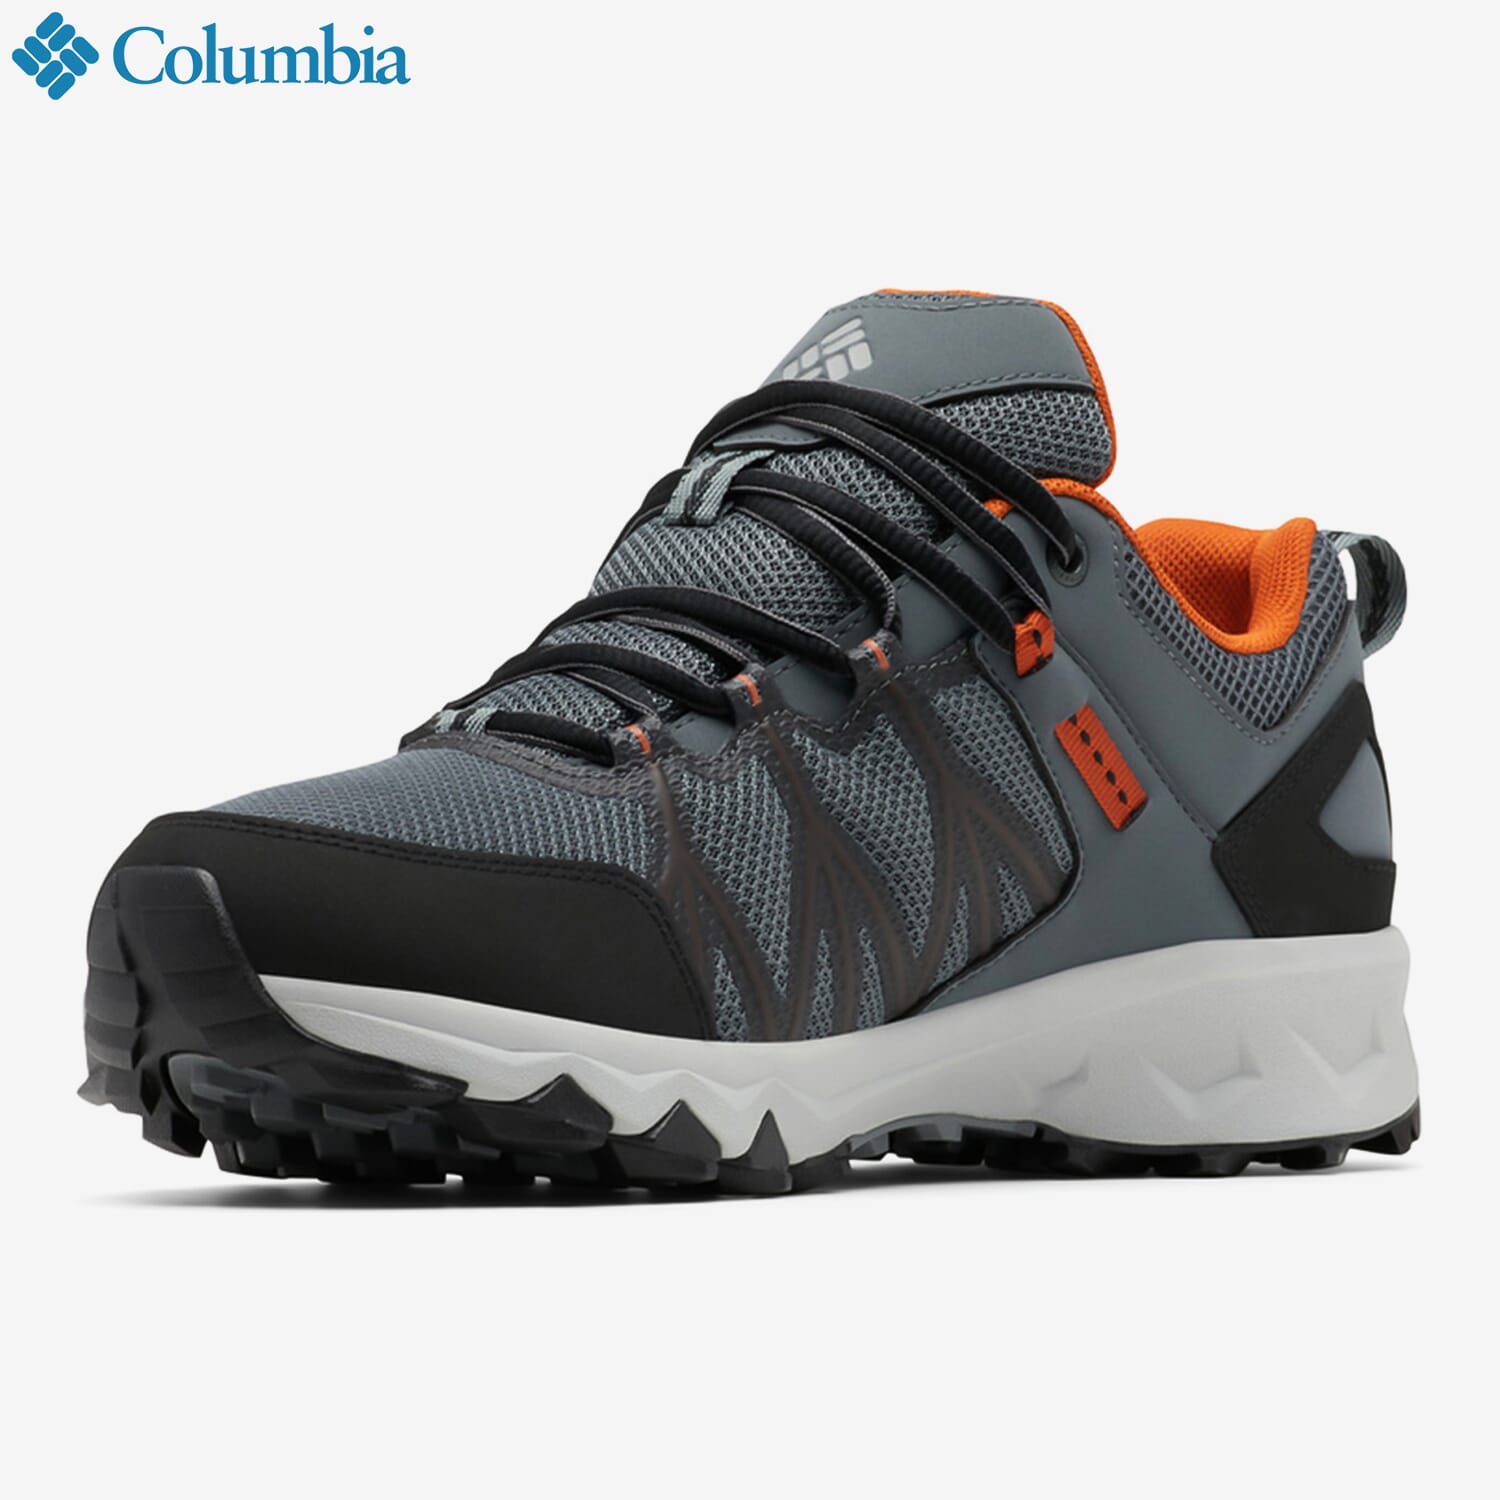 Buy Columbia Hiking Shoes at Best Prices Online in Nepal 